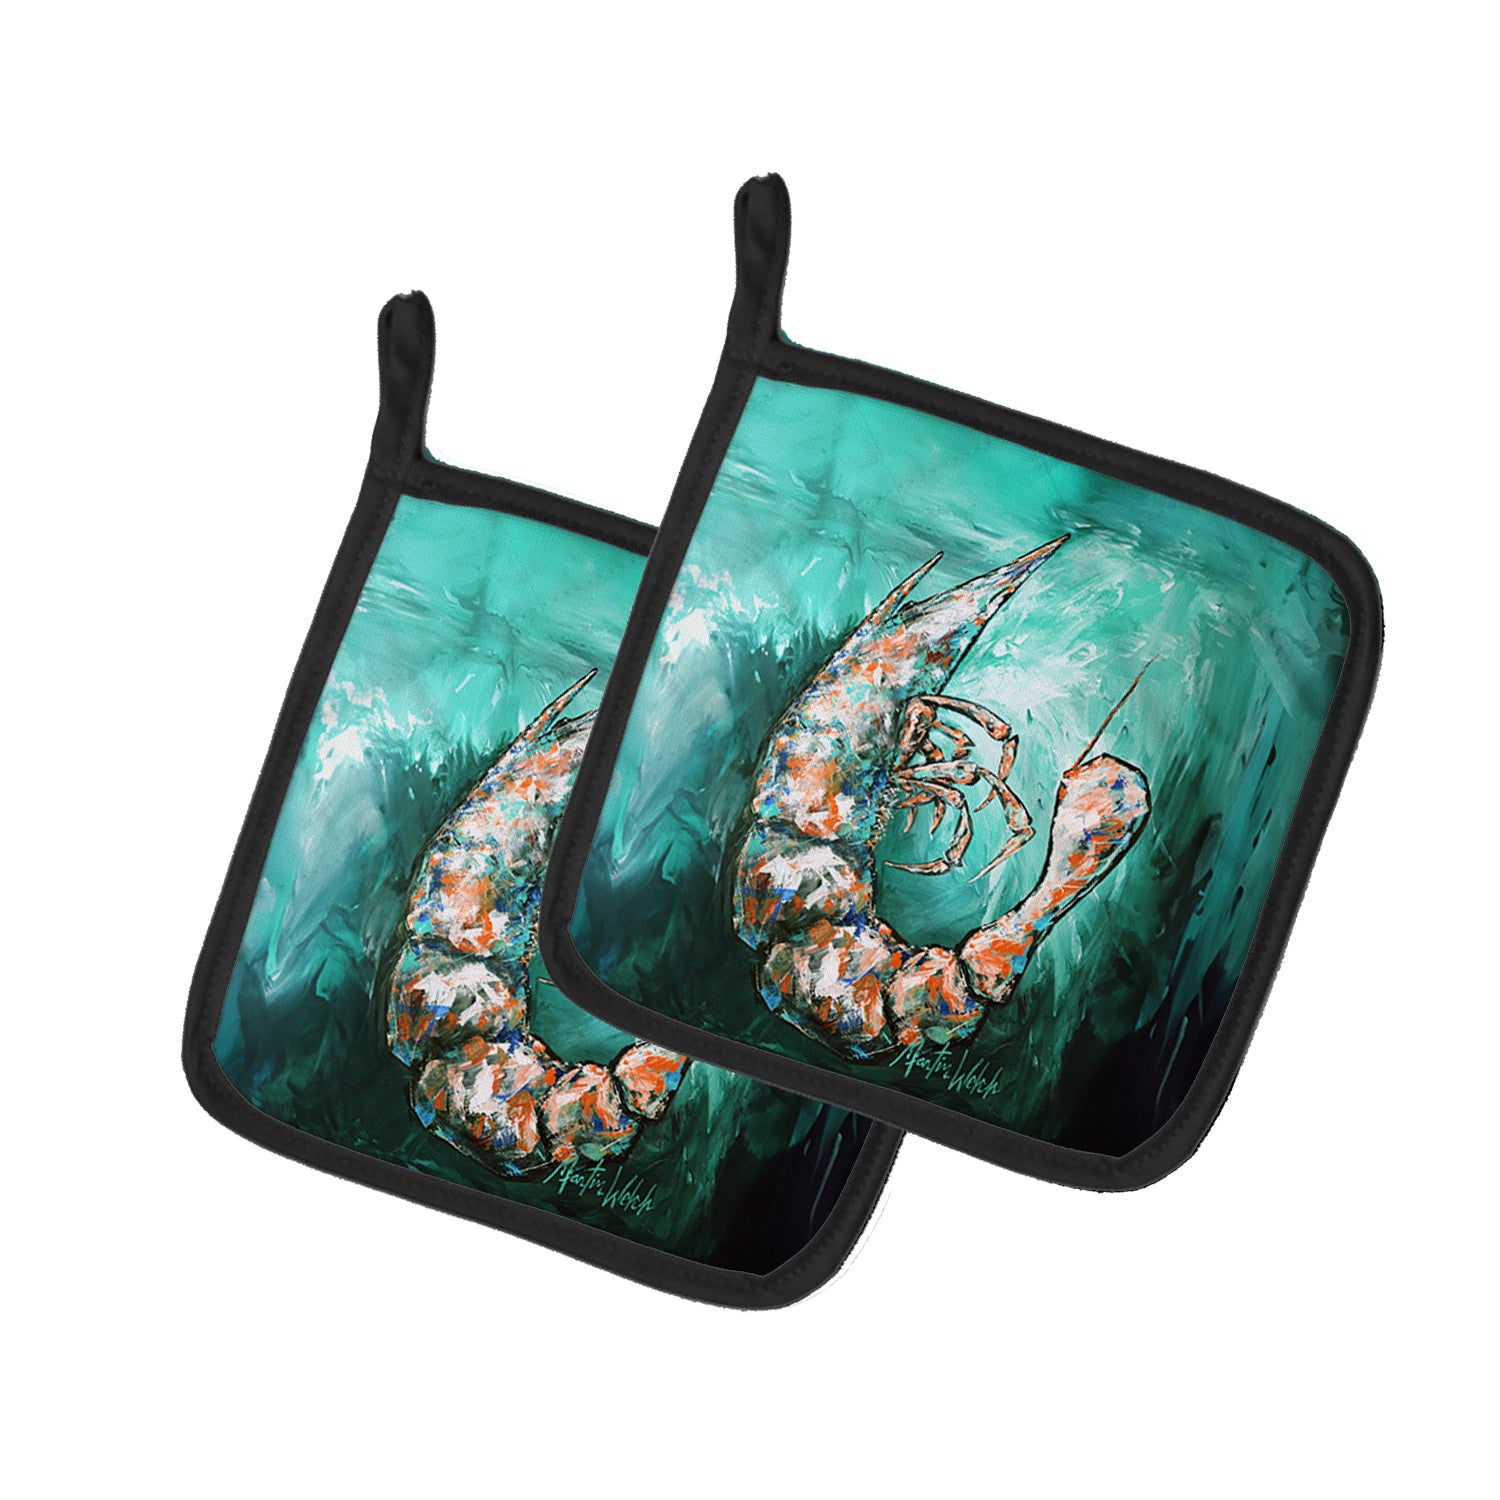 Buy this A Touch of Blue Shrimp Pair of Pot Holders